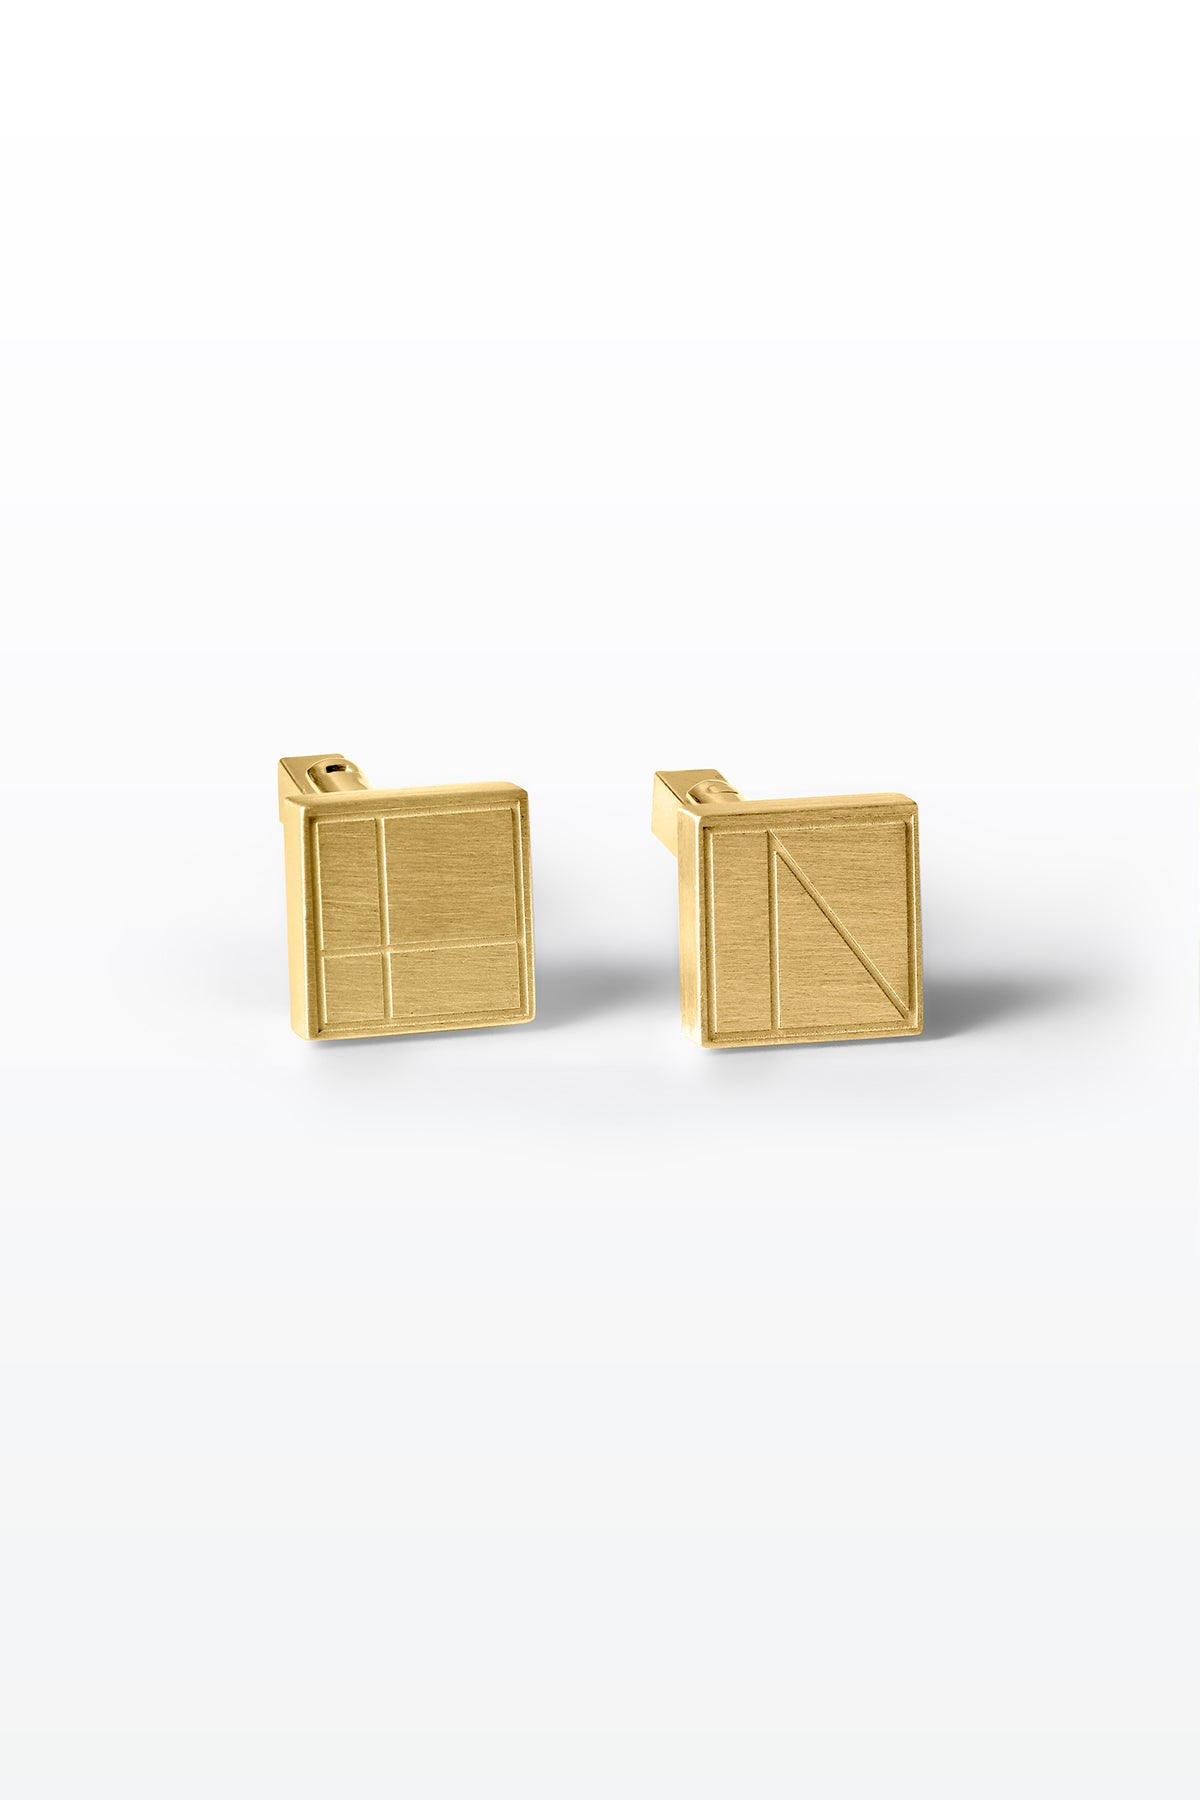 LVK x Cafe Costume Square Cuff Gold Plated Silver